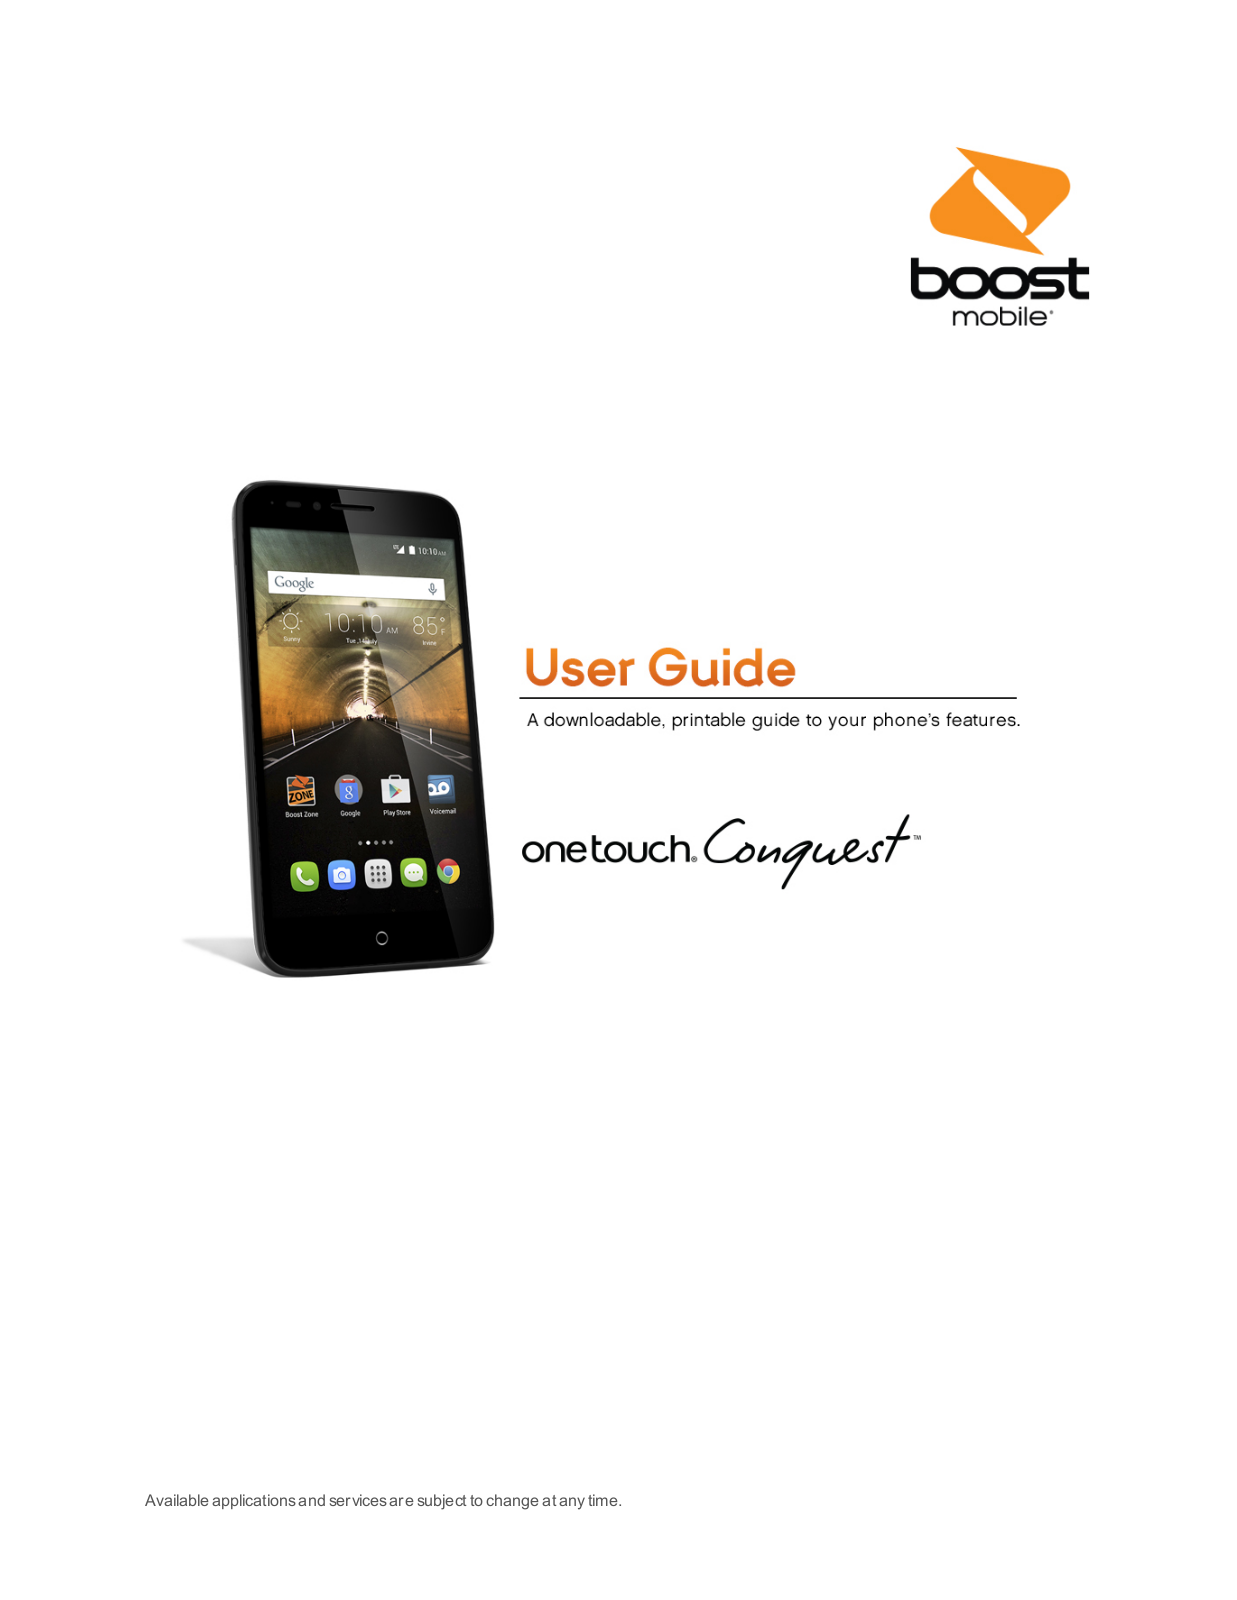 Alcatel One Touch Conquest User Guide